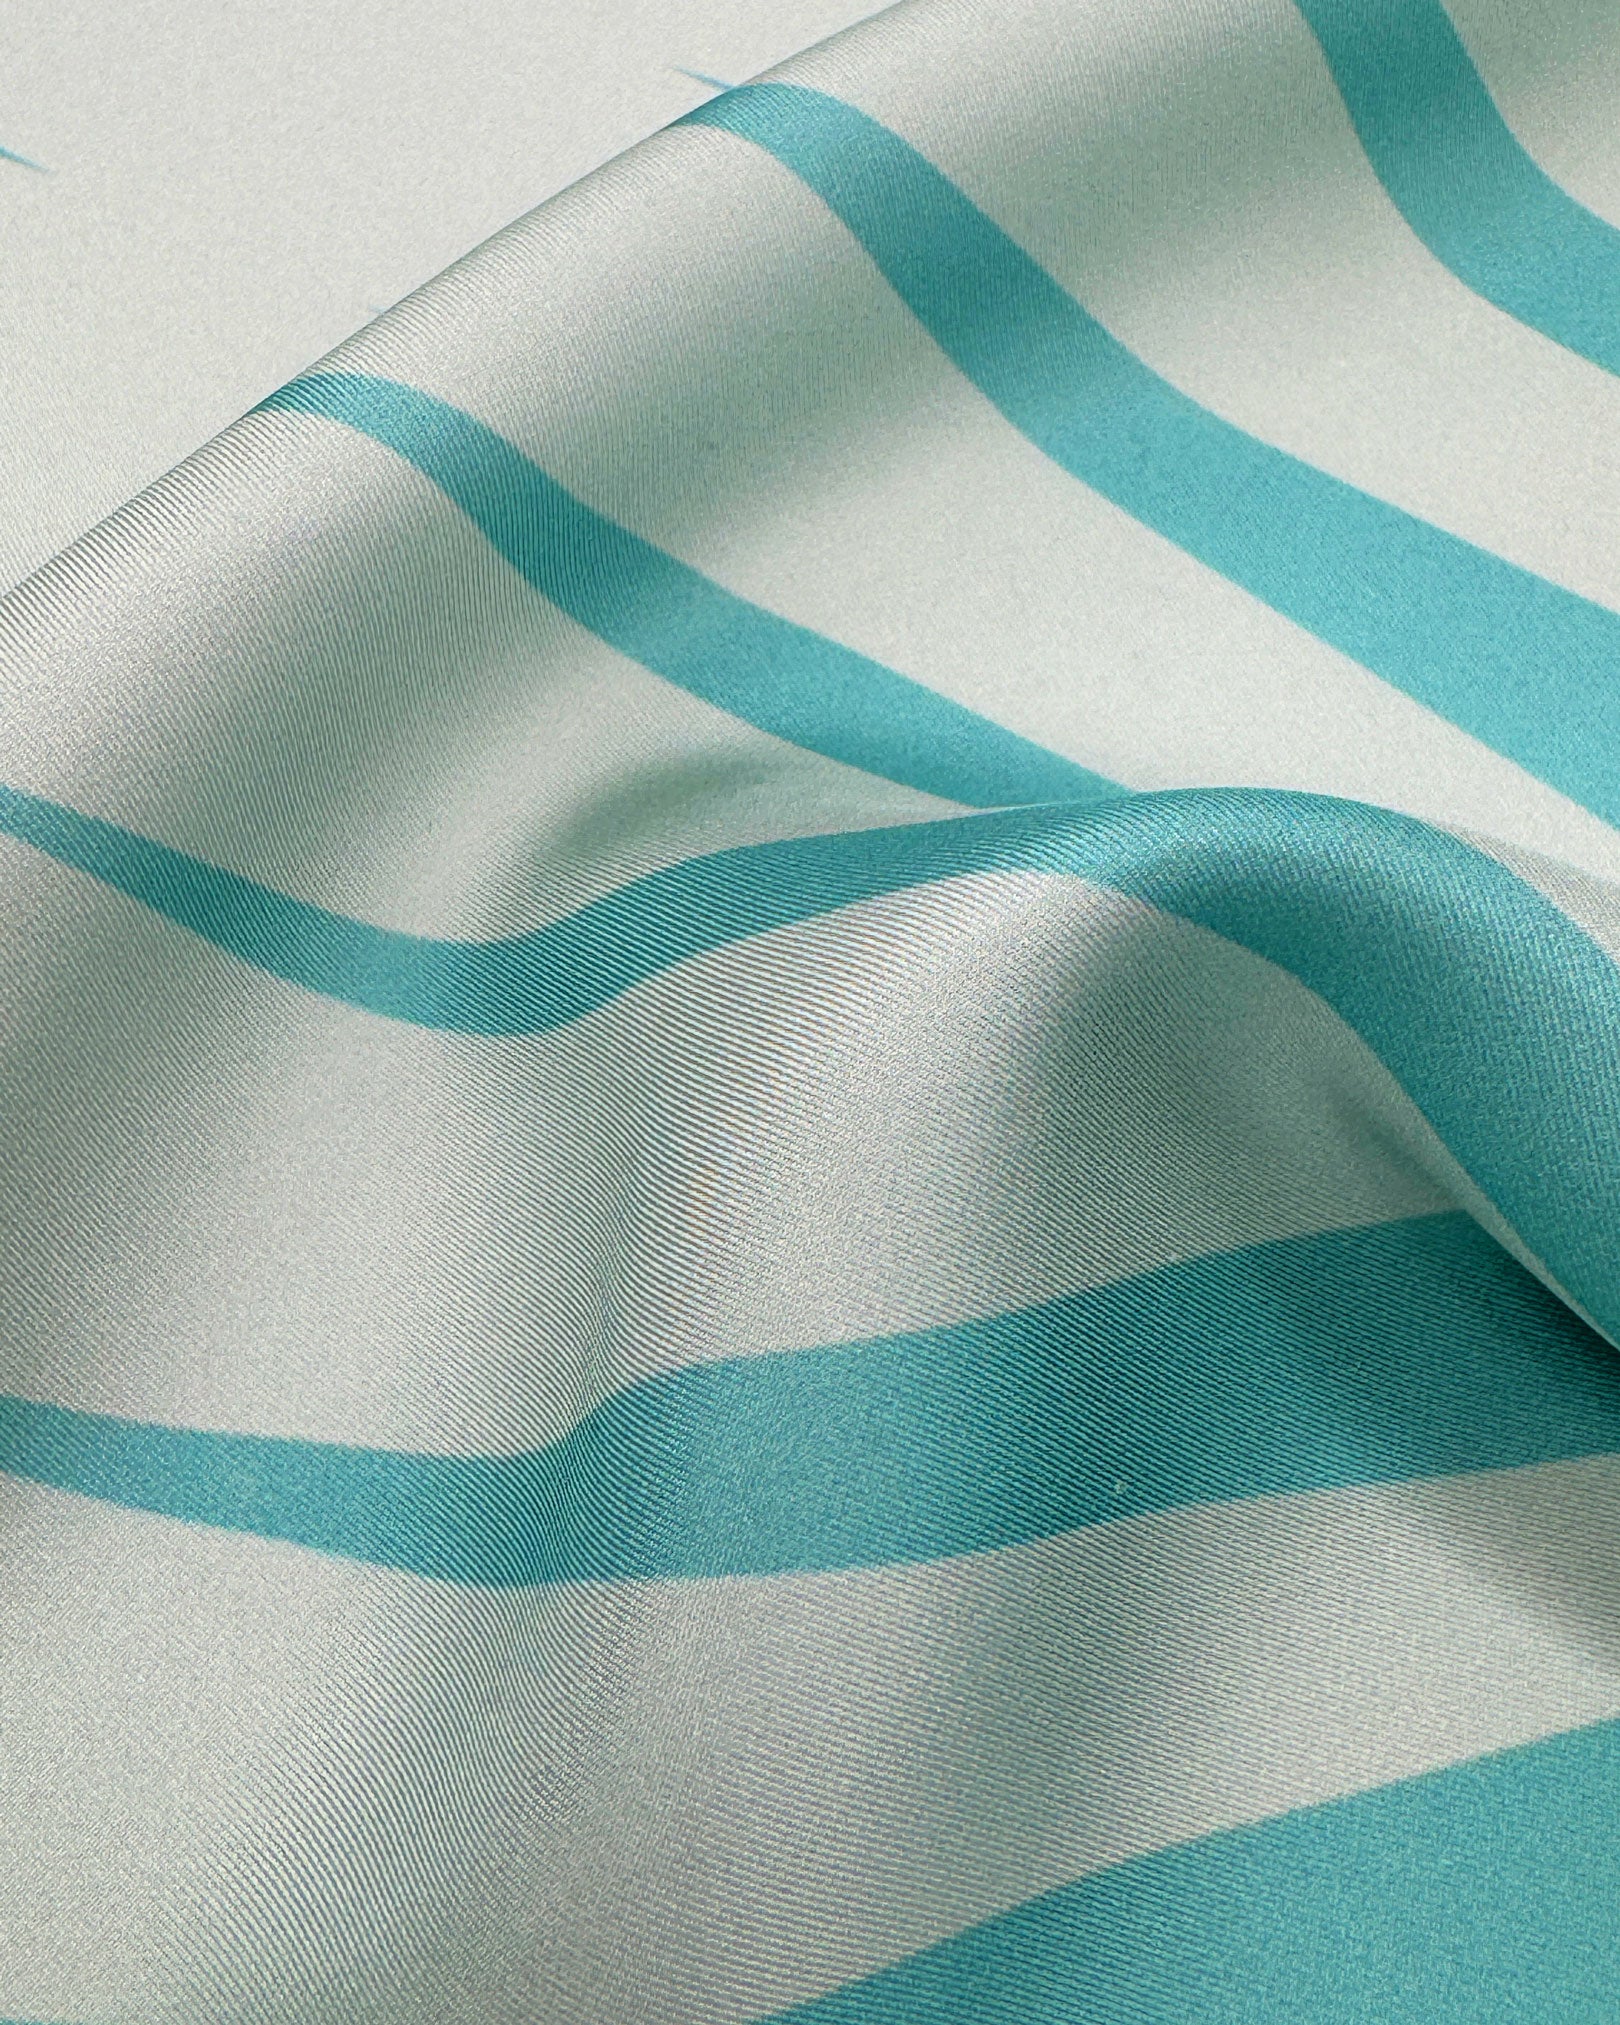 A ruffled close-up of the 'Hamburg' silk neckerchief, presenting a closer view of the waveform-like motif in teal and turquoise.